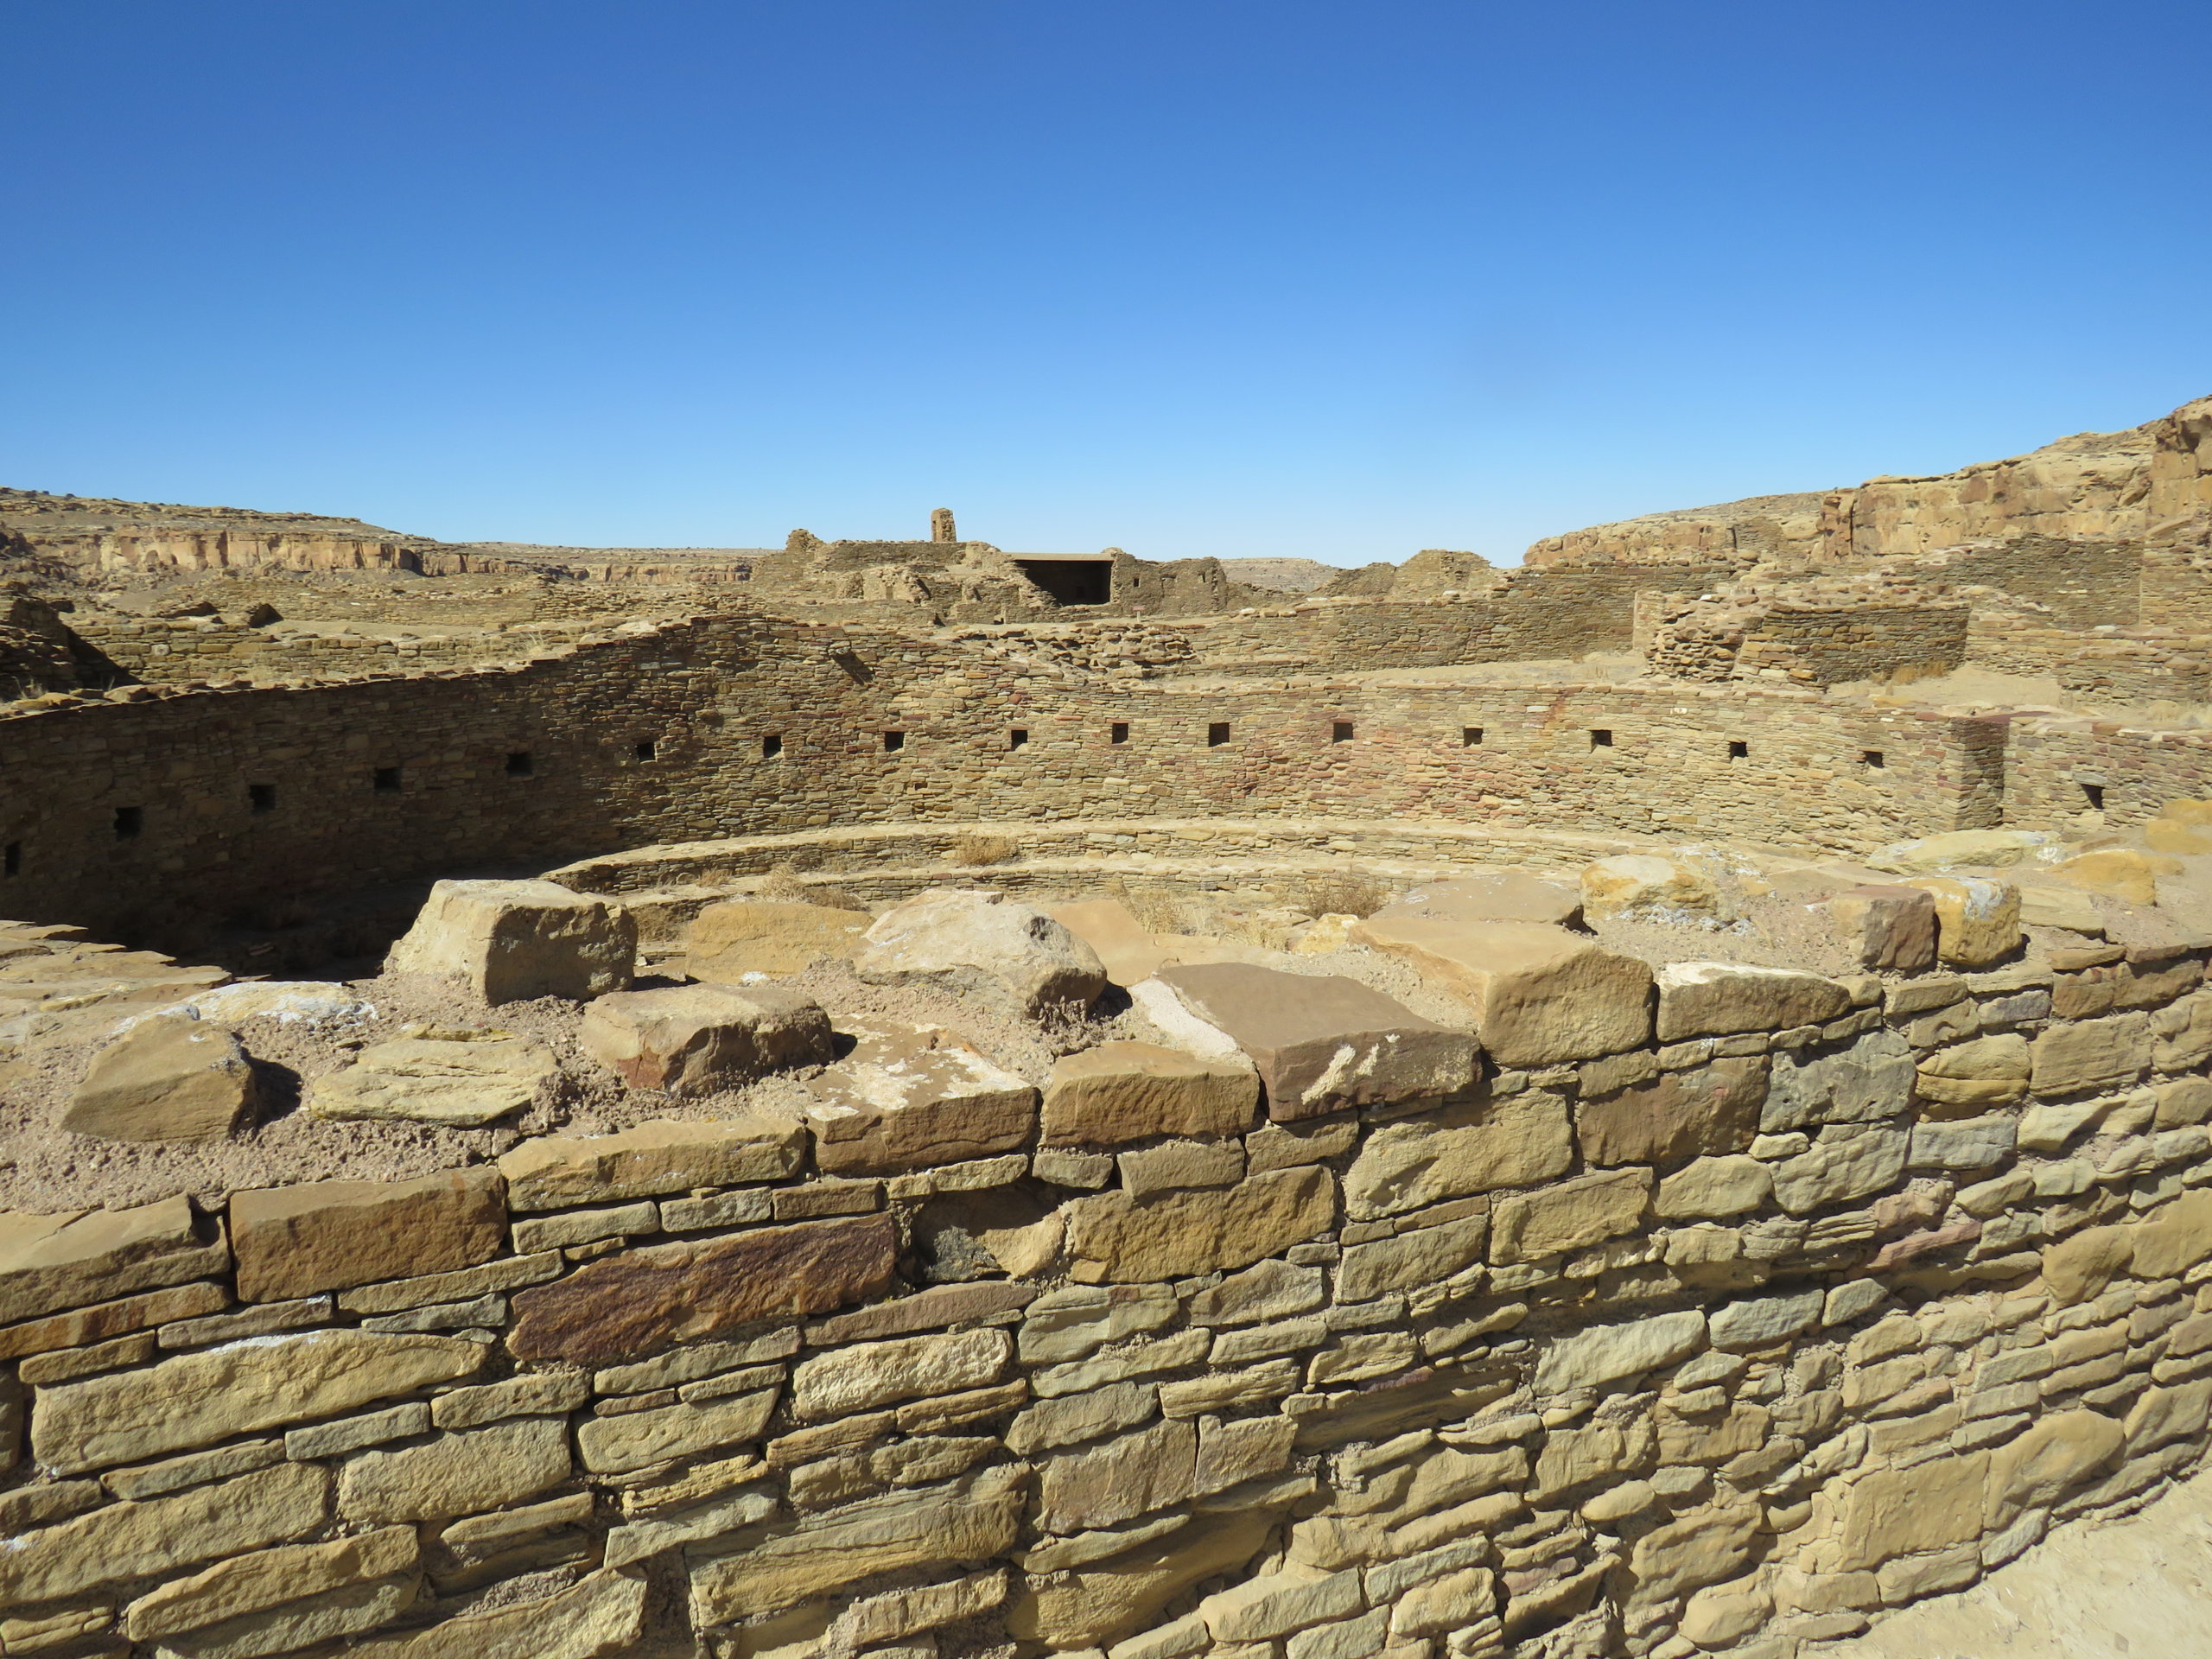 New report urges protection of cultural heritage sites like Chaco, Mesa Verde from oil and gas